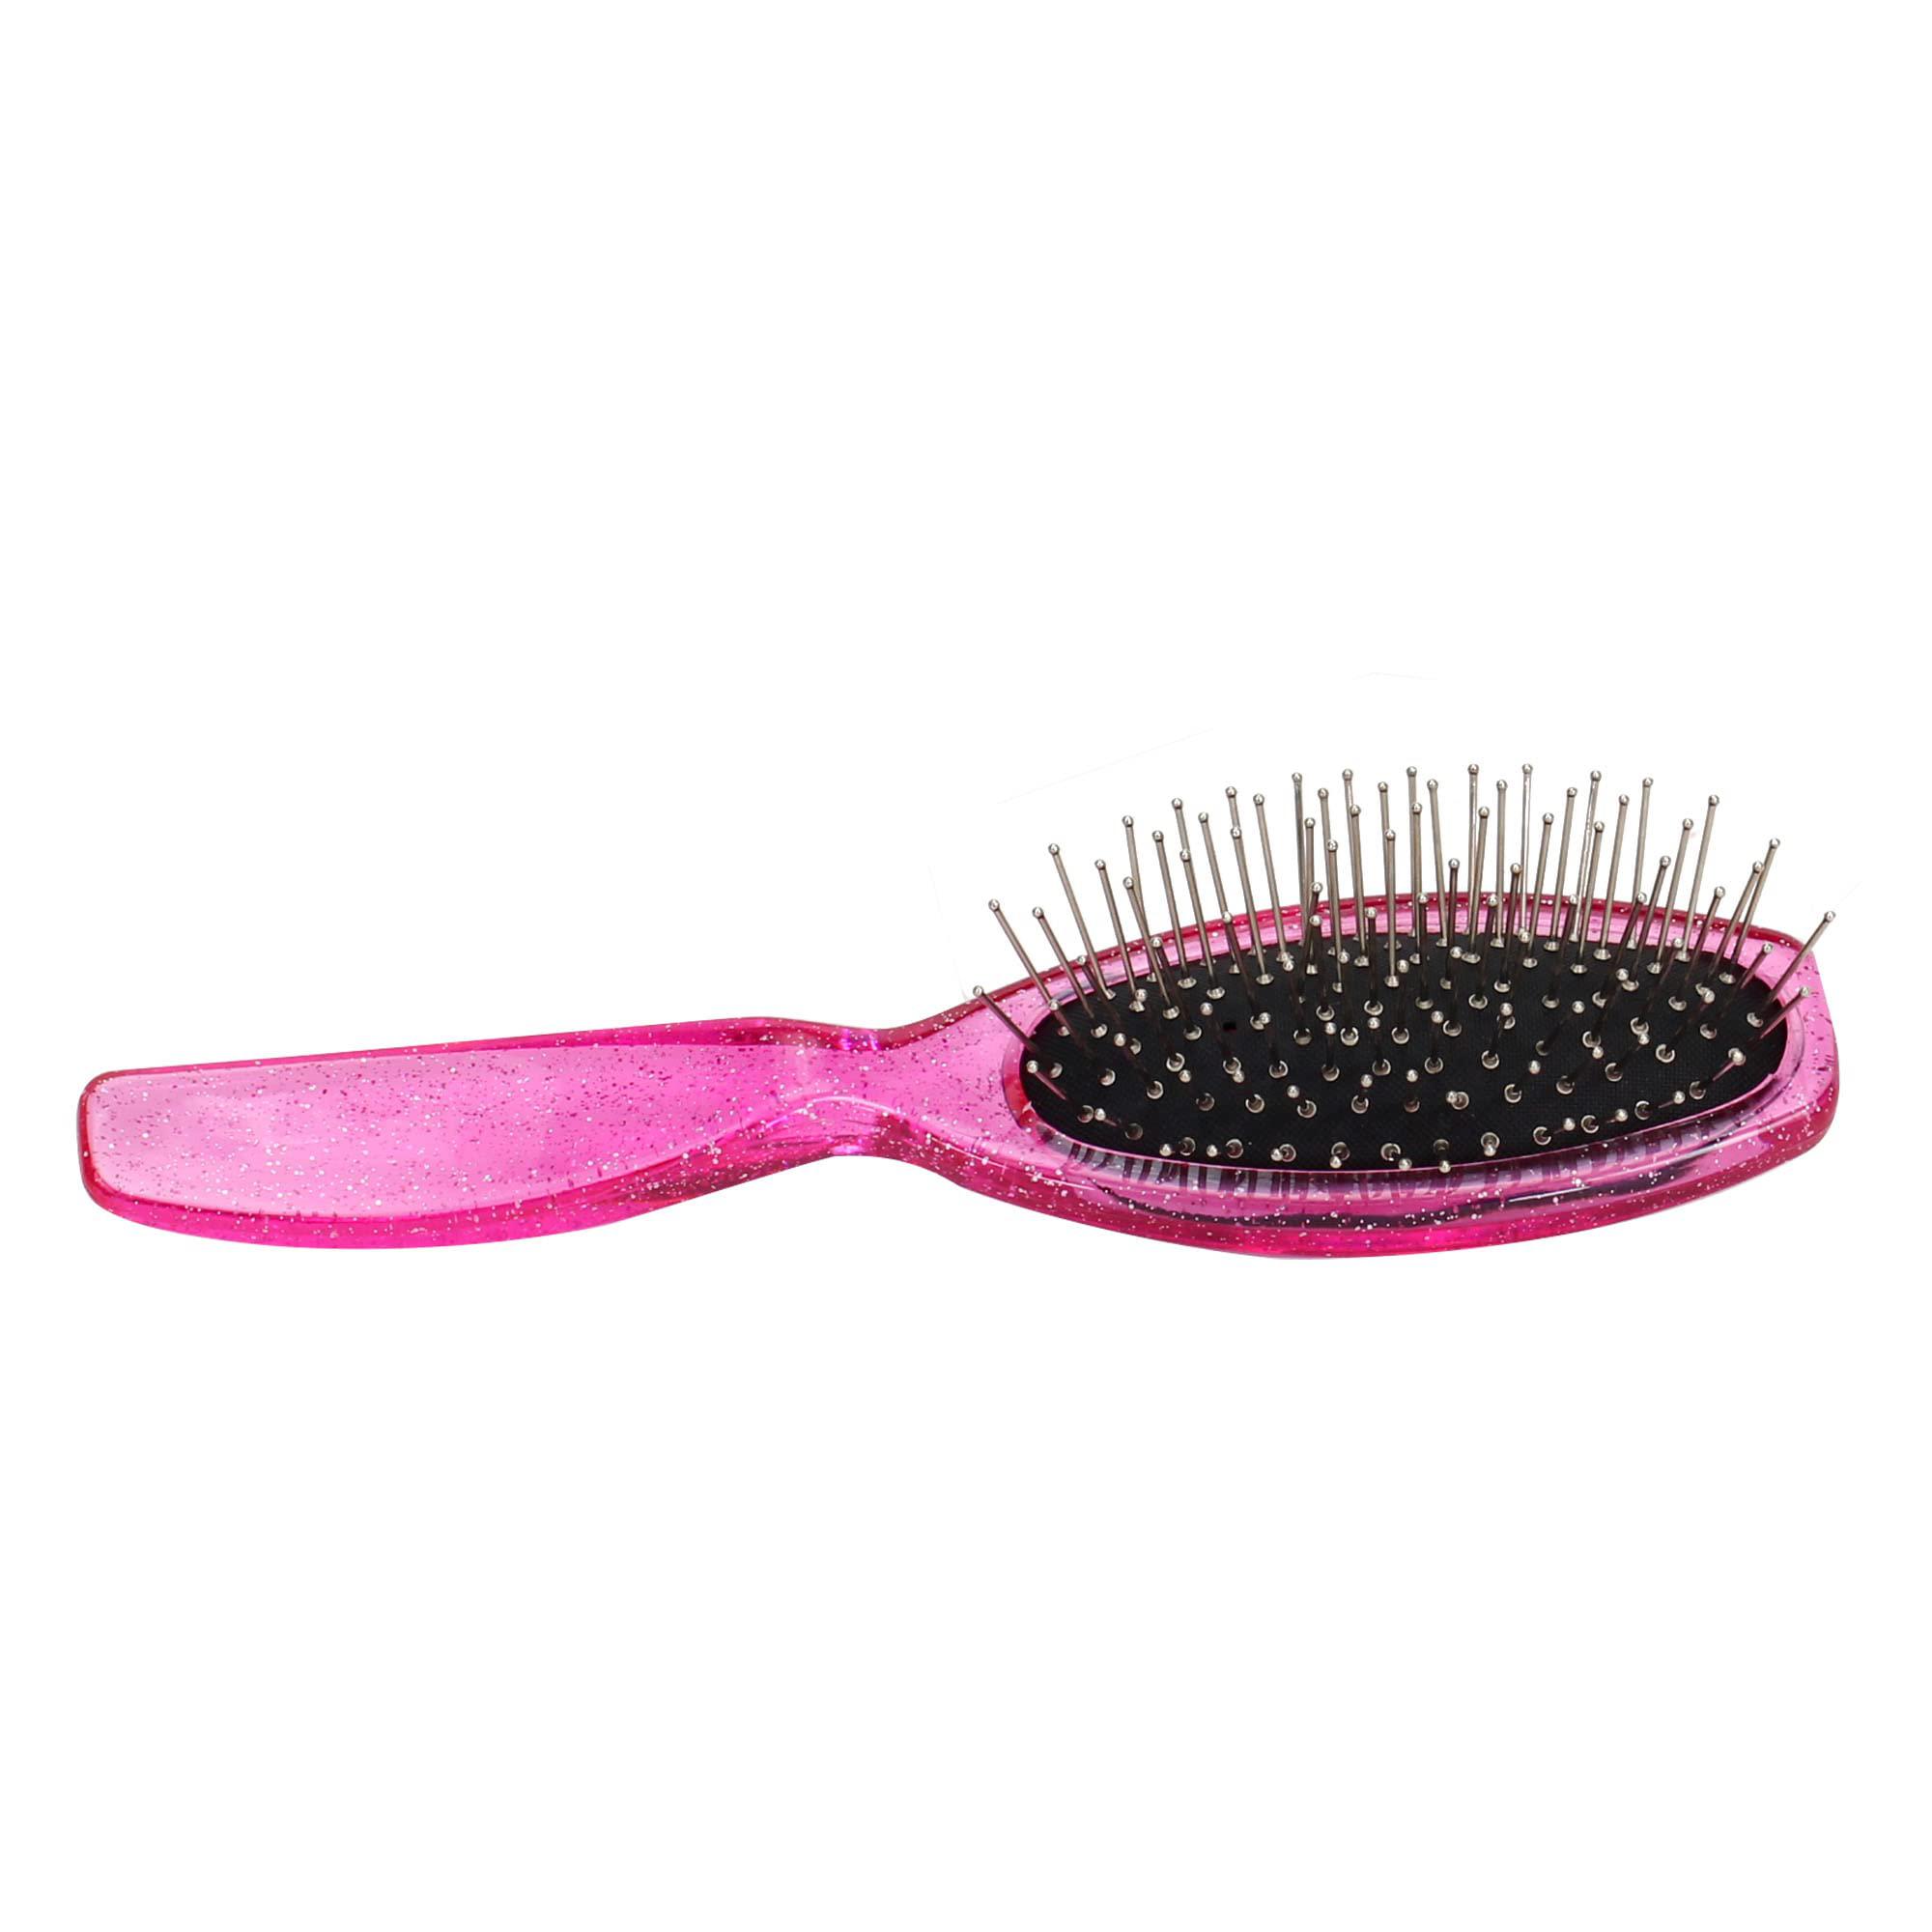 Sophia\'s sophia's doll hair brush, ideal for dolls with synthetic or wig-like hair, sized for smaller hands, in glittery hot pink